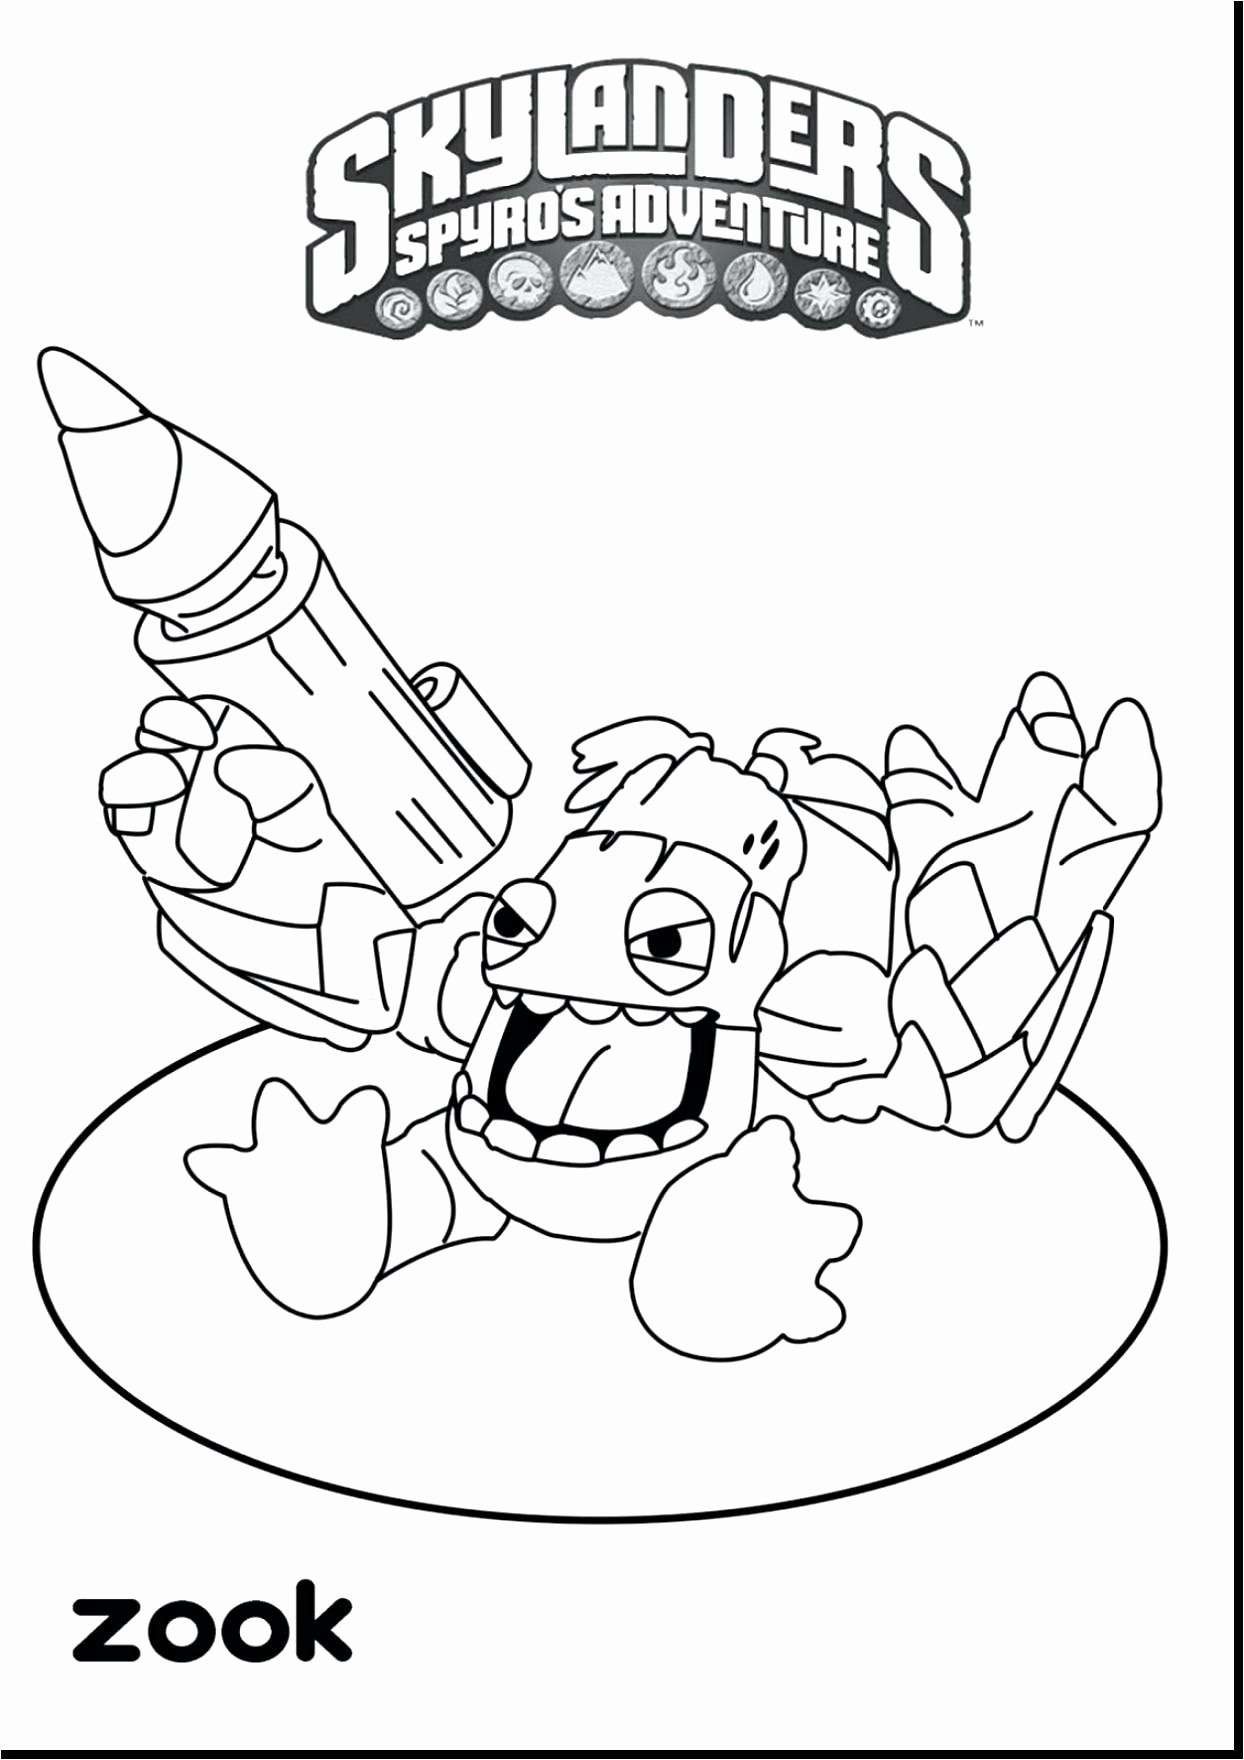 Cool Coloring Sheets to Print Out Wallpaper